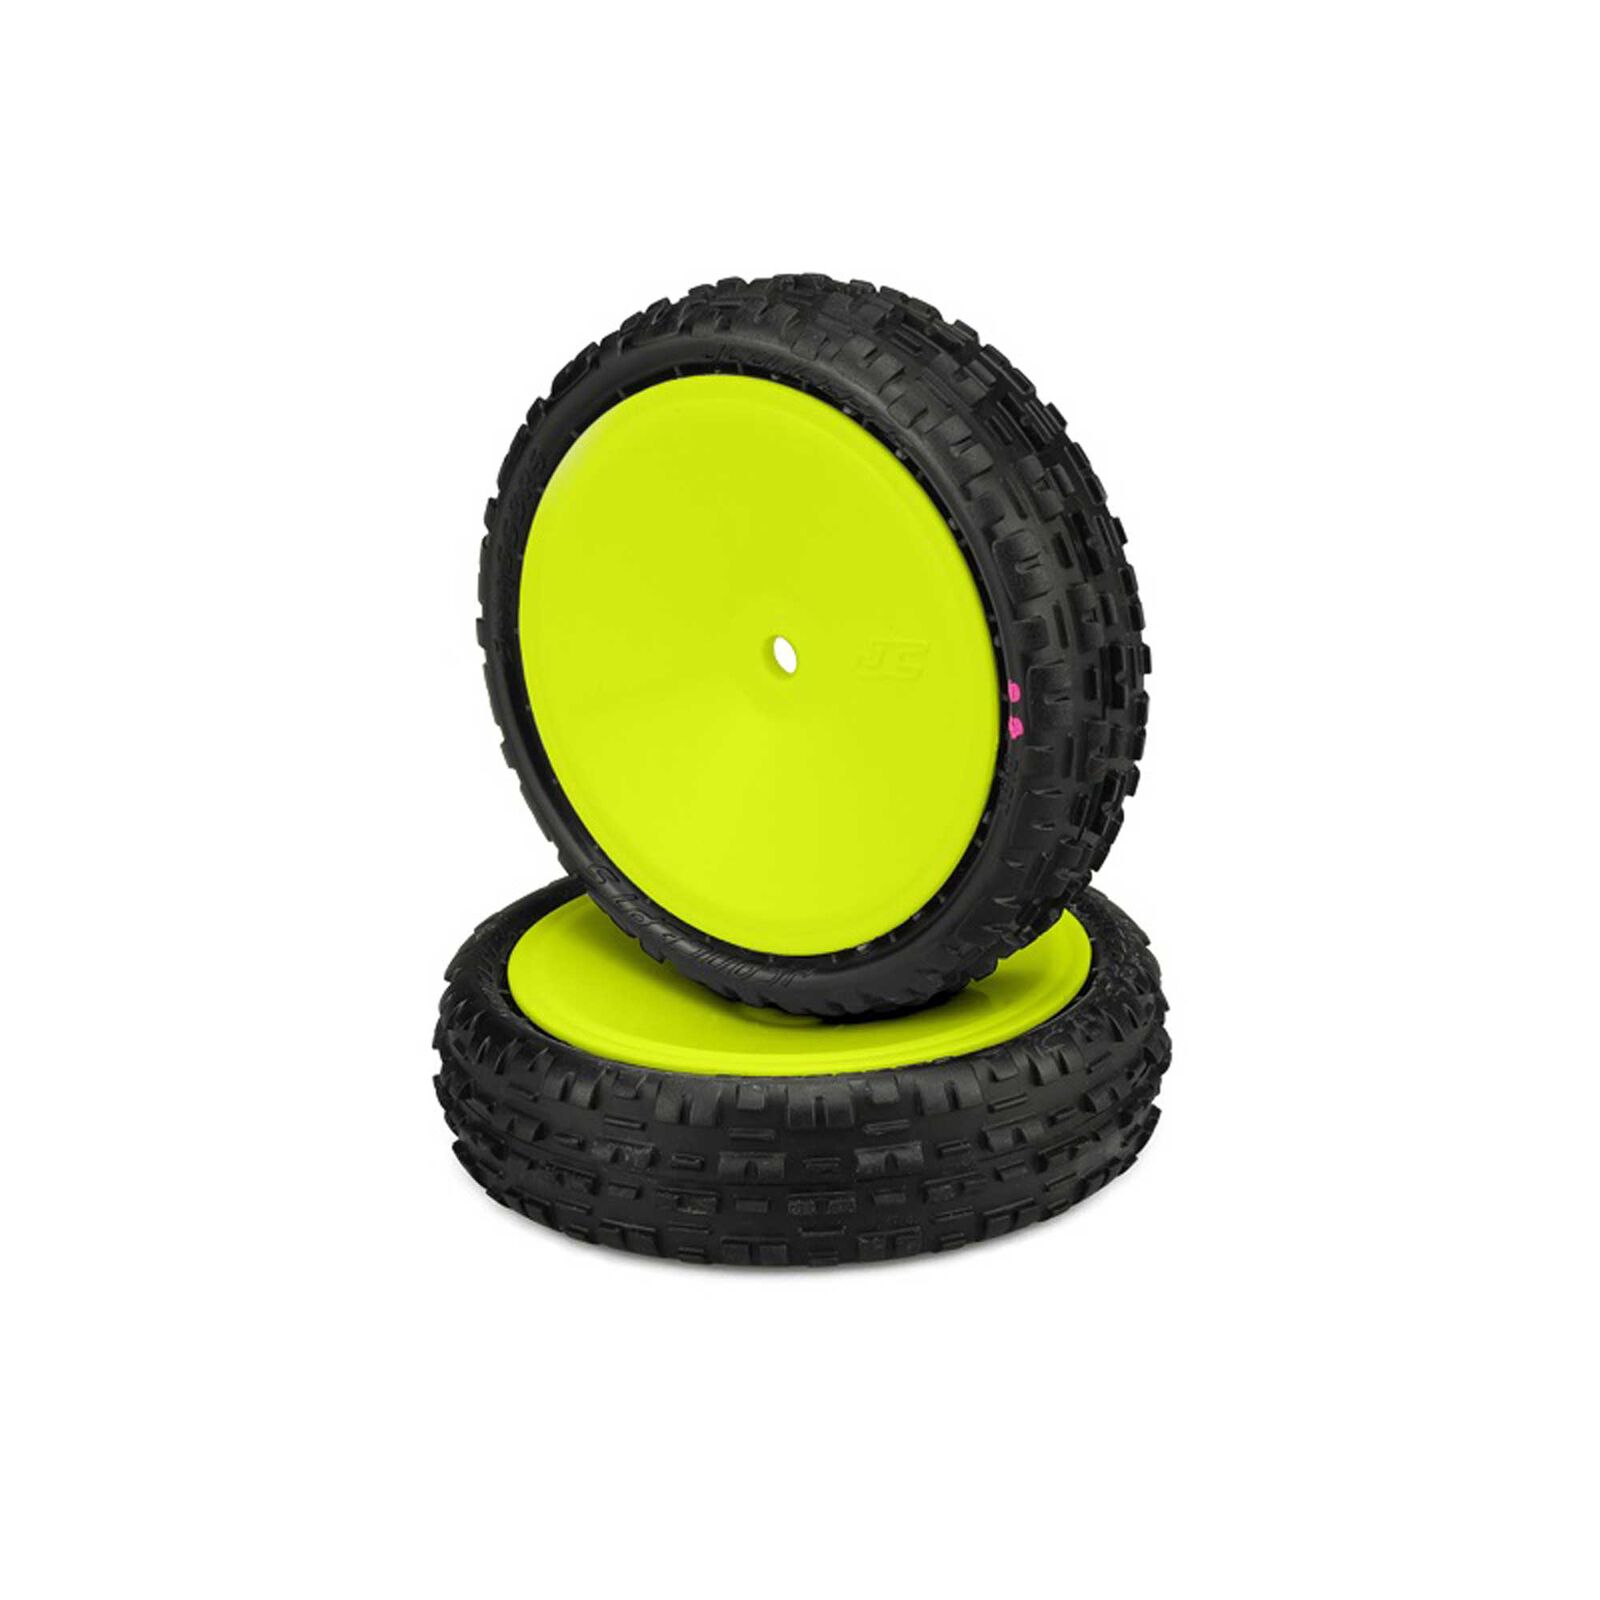 1/10 Swaggers Slim 2.2” Pre-Mounted Front 2WD Buggy Tires, Yellow Wheels, Pink Compound (2)